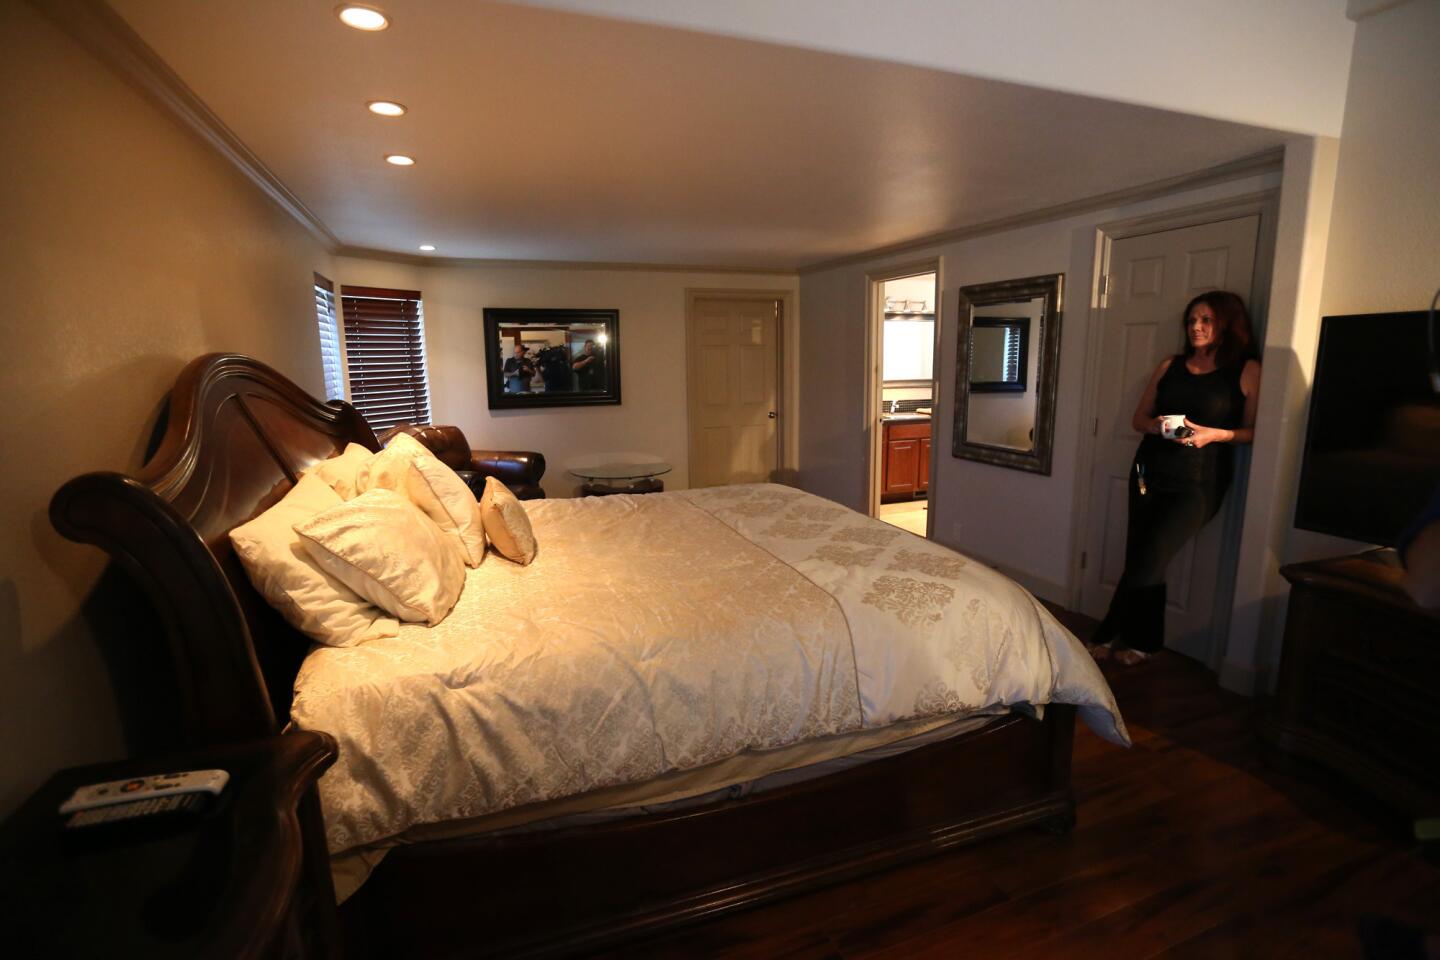 Lawanna, shift manager at Dennis Hof's Love Ranch, stands in the bedroom where NBA star Lamar Odom was found unconscious in Crystal, Nev.